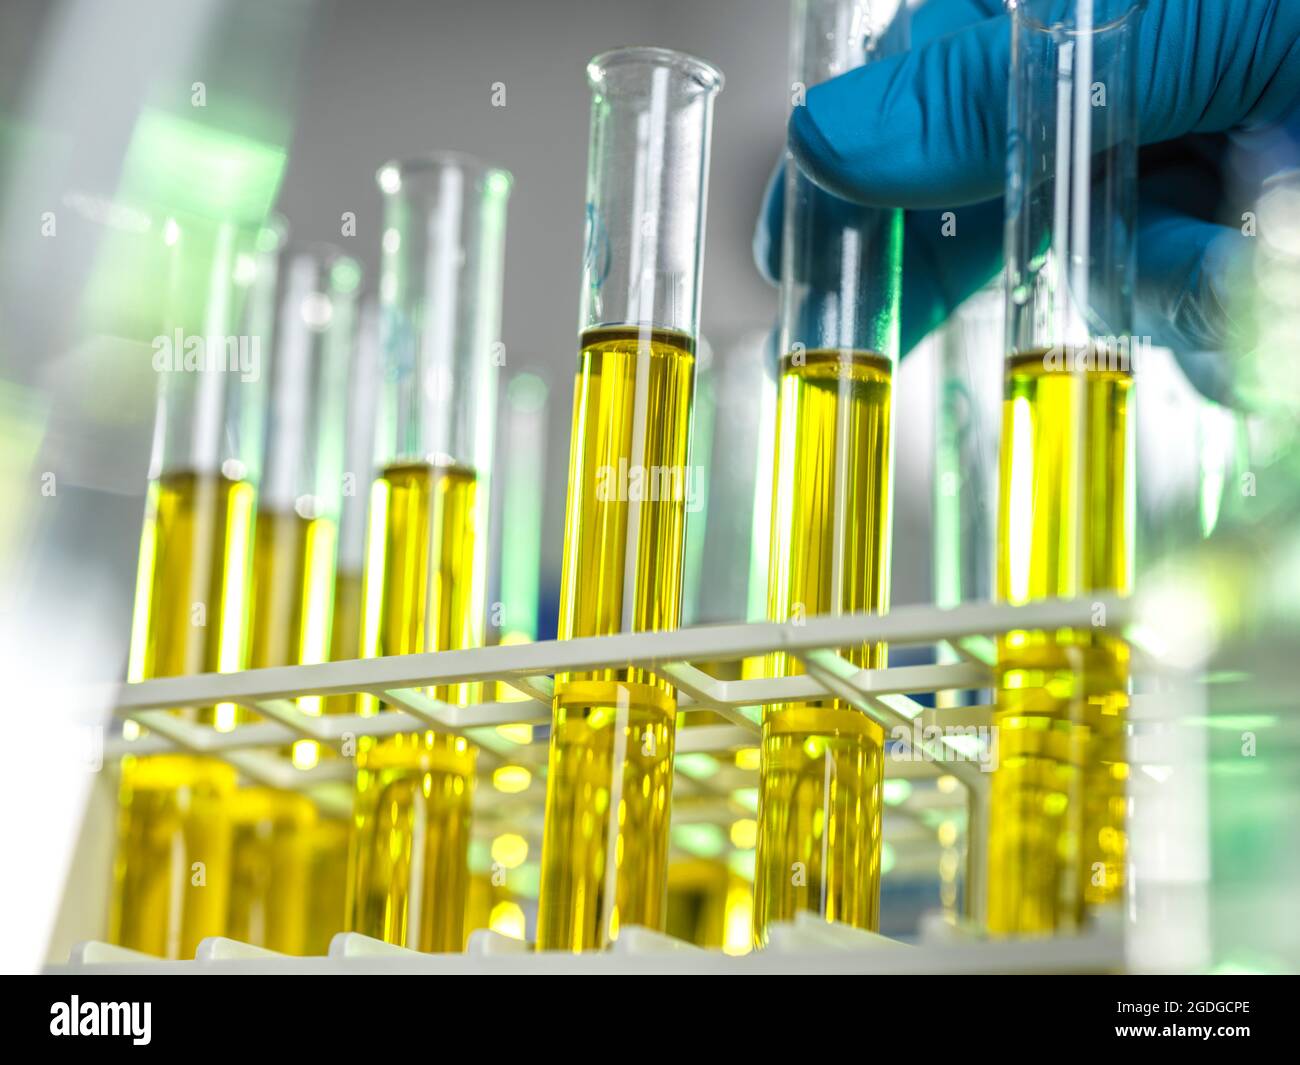 Oil samples being developed for medicine and chemicals Stock Photo